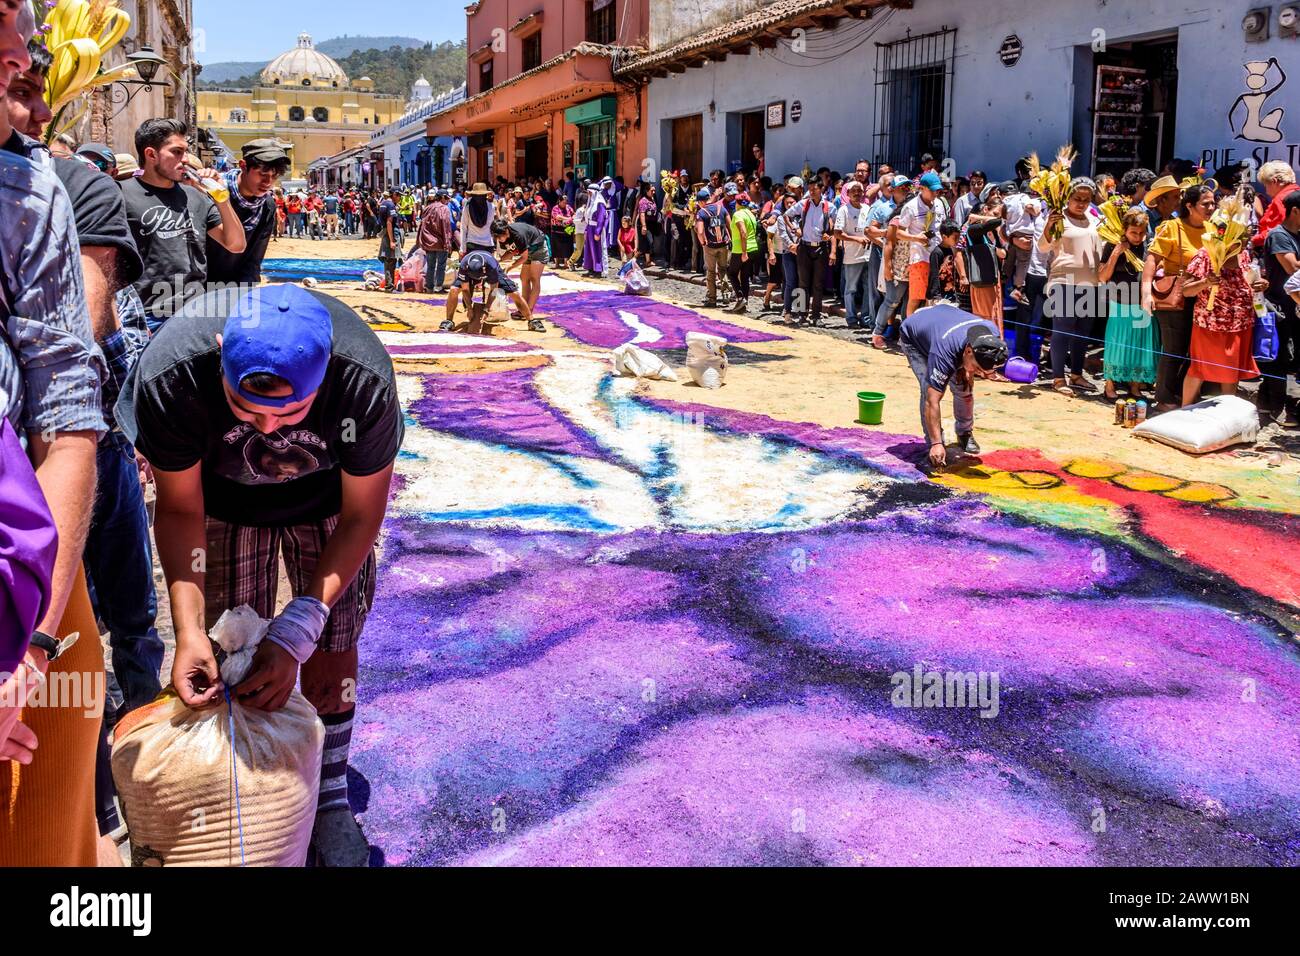 Antigua, Guatemala -  April 14, 2019: Tourists watch making of dyed sawdust Palm Sunday procession carpet in UNESCO World Heritage Site. Stock Photo